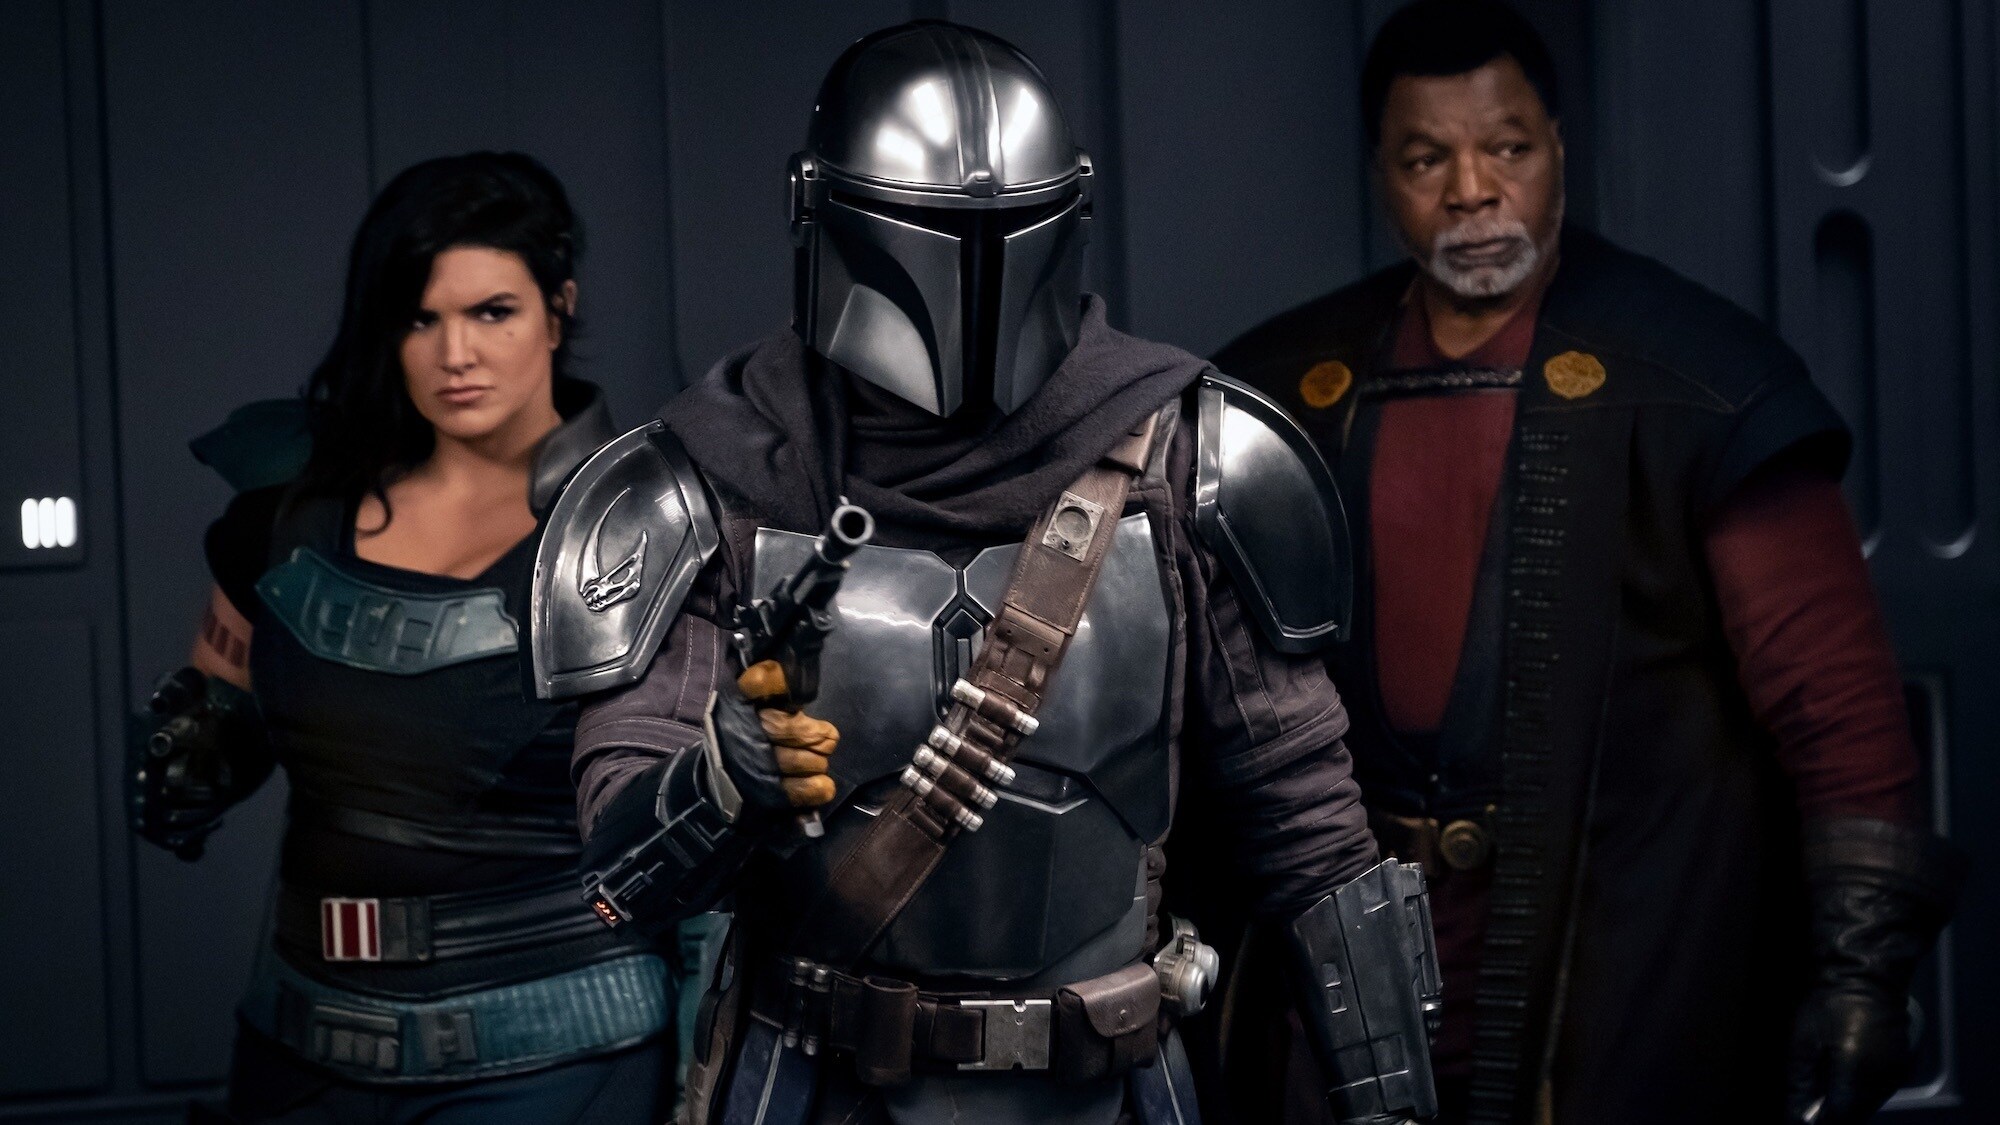 (Left to right) Gina Carano is Cara Dune, Pedro Pascal is the Mandalorian and Carl Weathers is Greef Karga in THE MANDALORIAN, season two, exclusively on Disney+